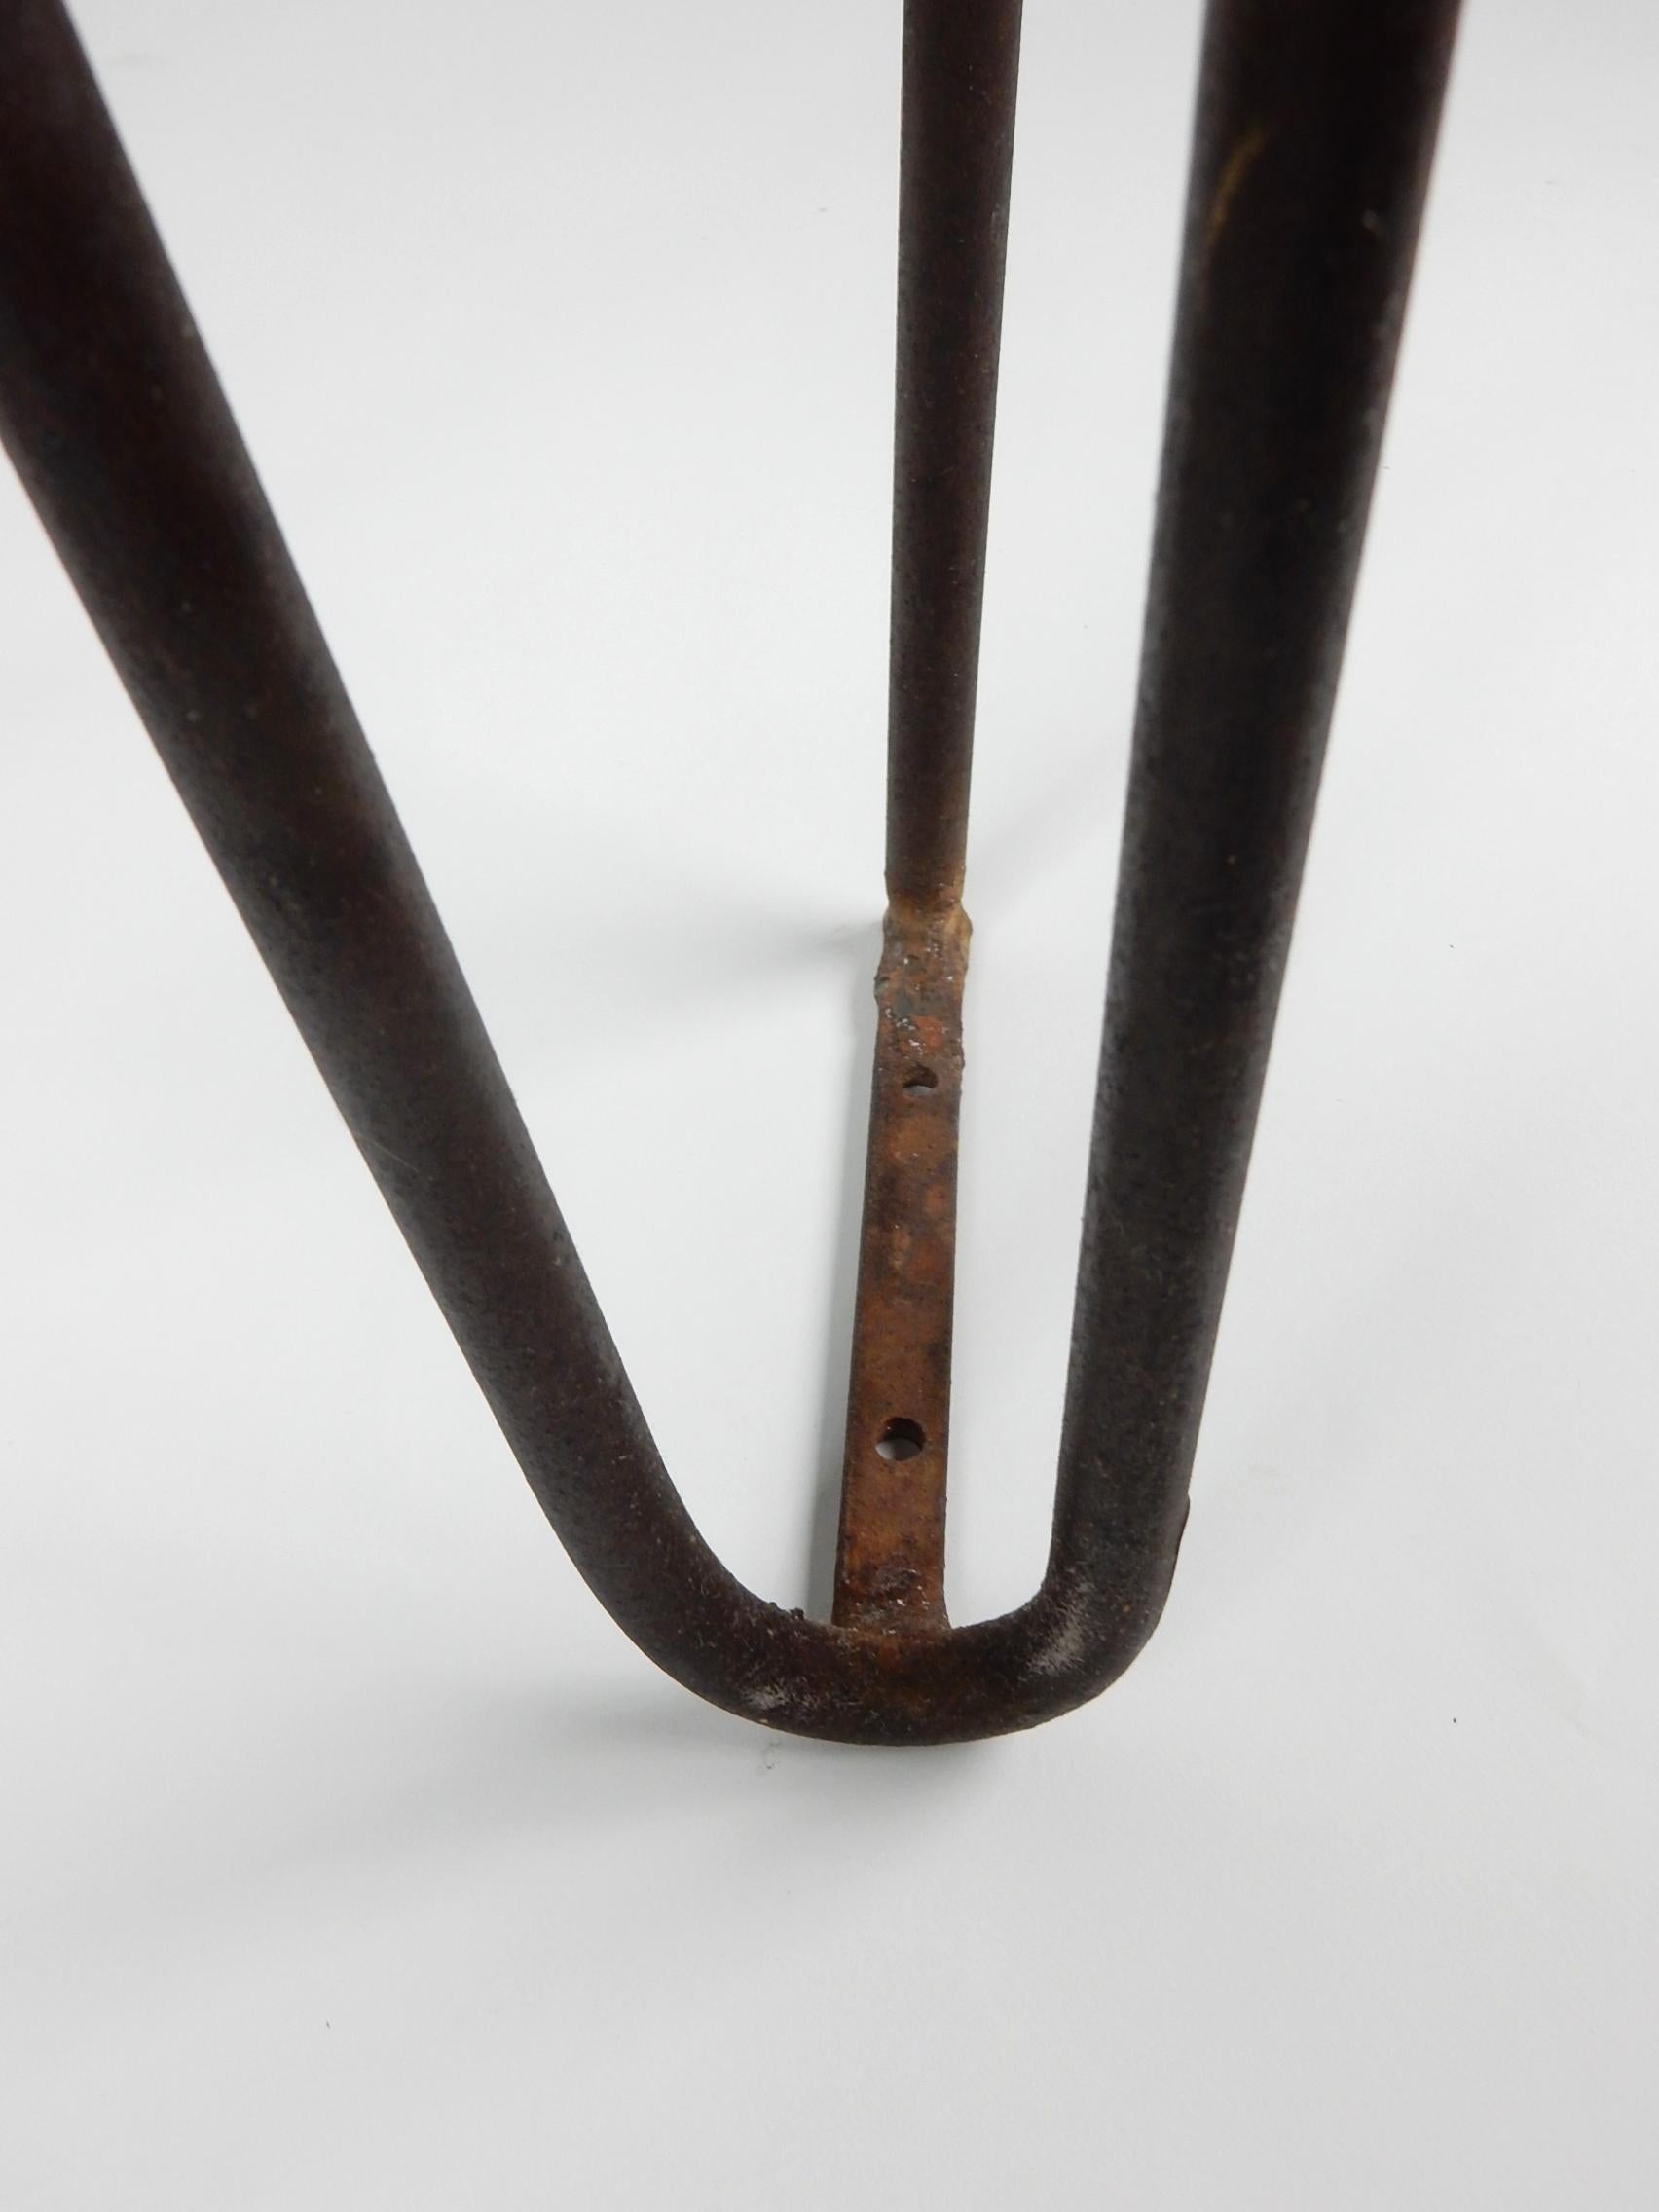 1950s Modernist Sculpted Iron Handrail Architectural Element 2